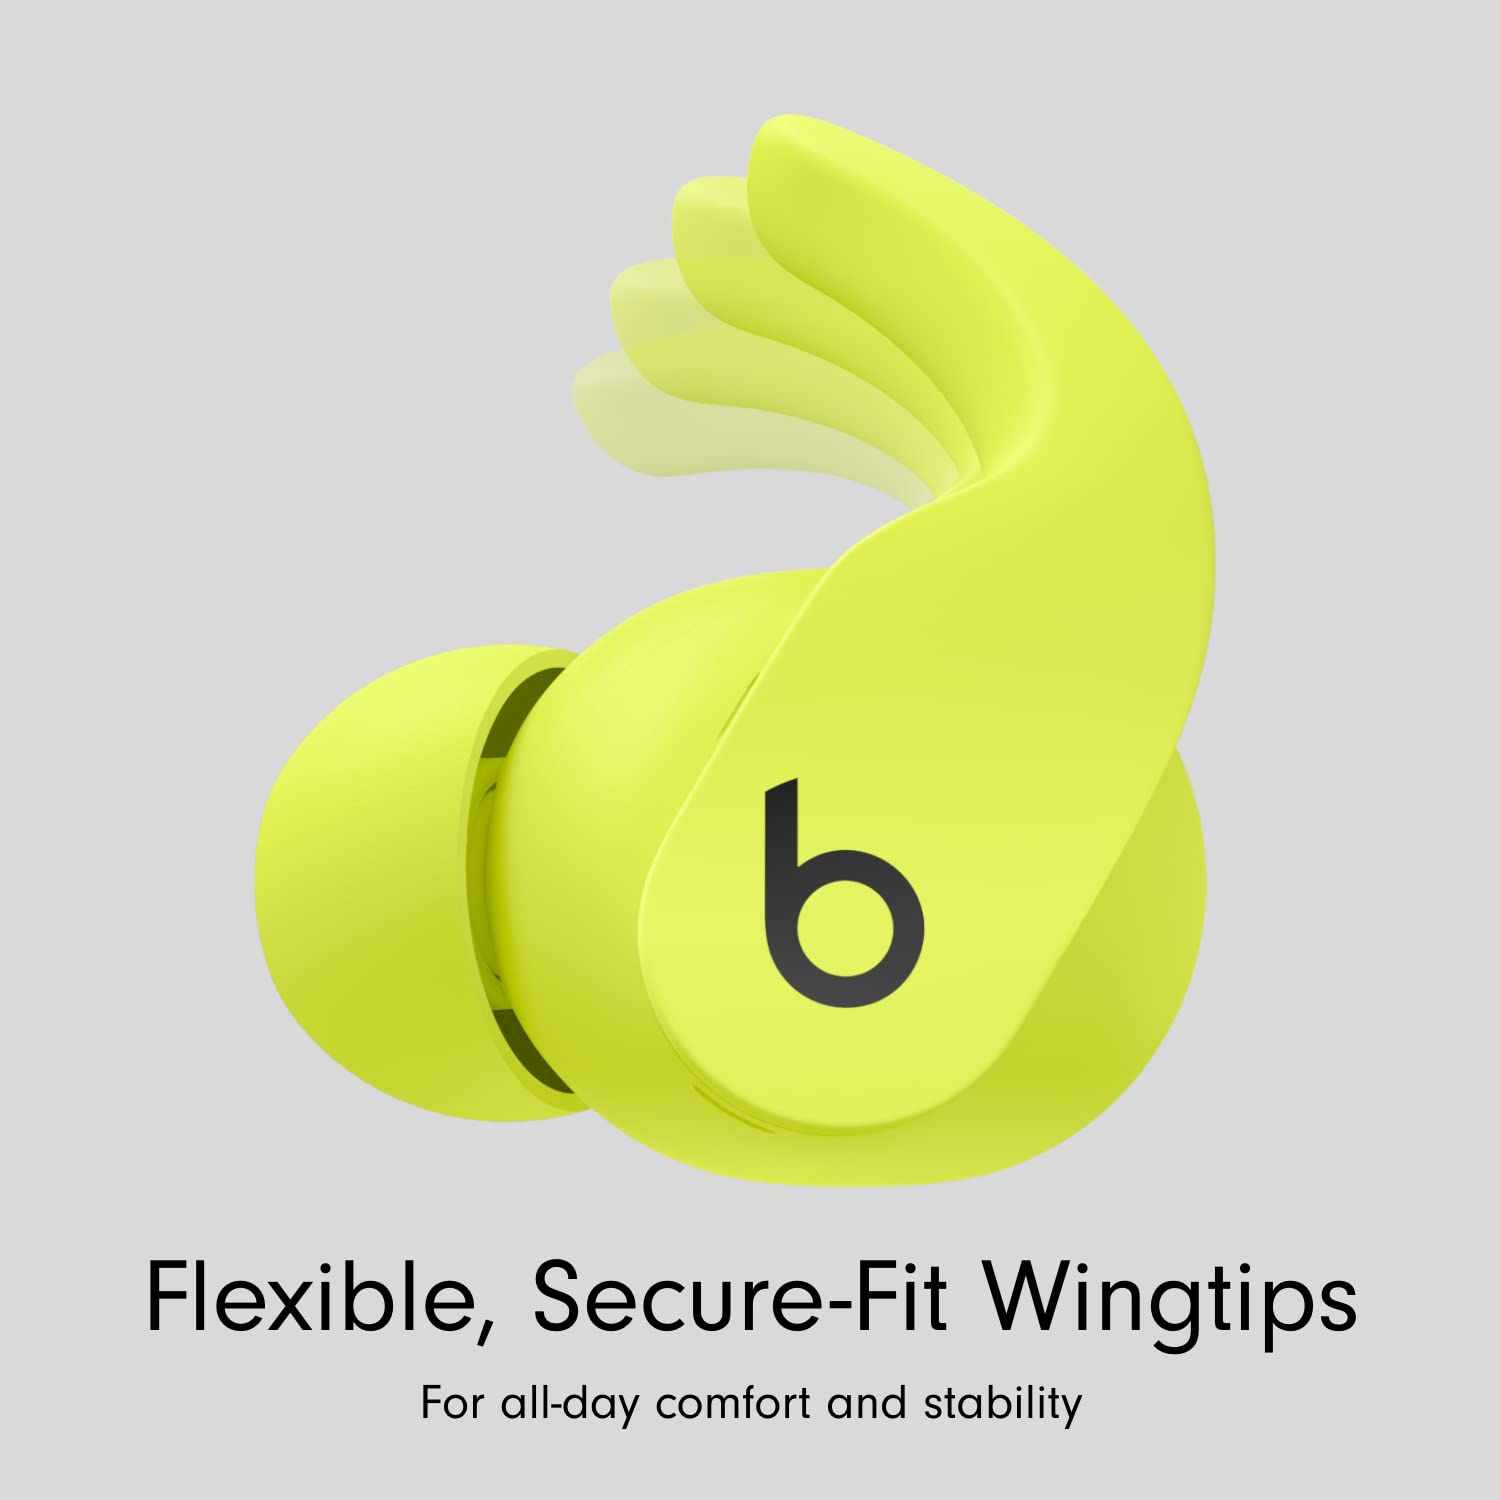 Beats Fit Pro - True Wireless Noise Cancelling Earbuds - Apple H1 Headphone Chip, Compatible with Apple & Android, Class 1 Bluetooth, Built-in Microphone, 6 Hours of Listening Time - Volt Yellow